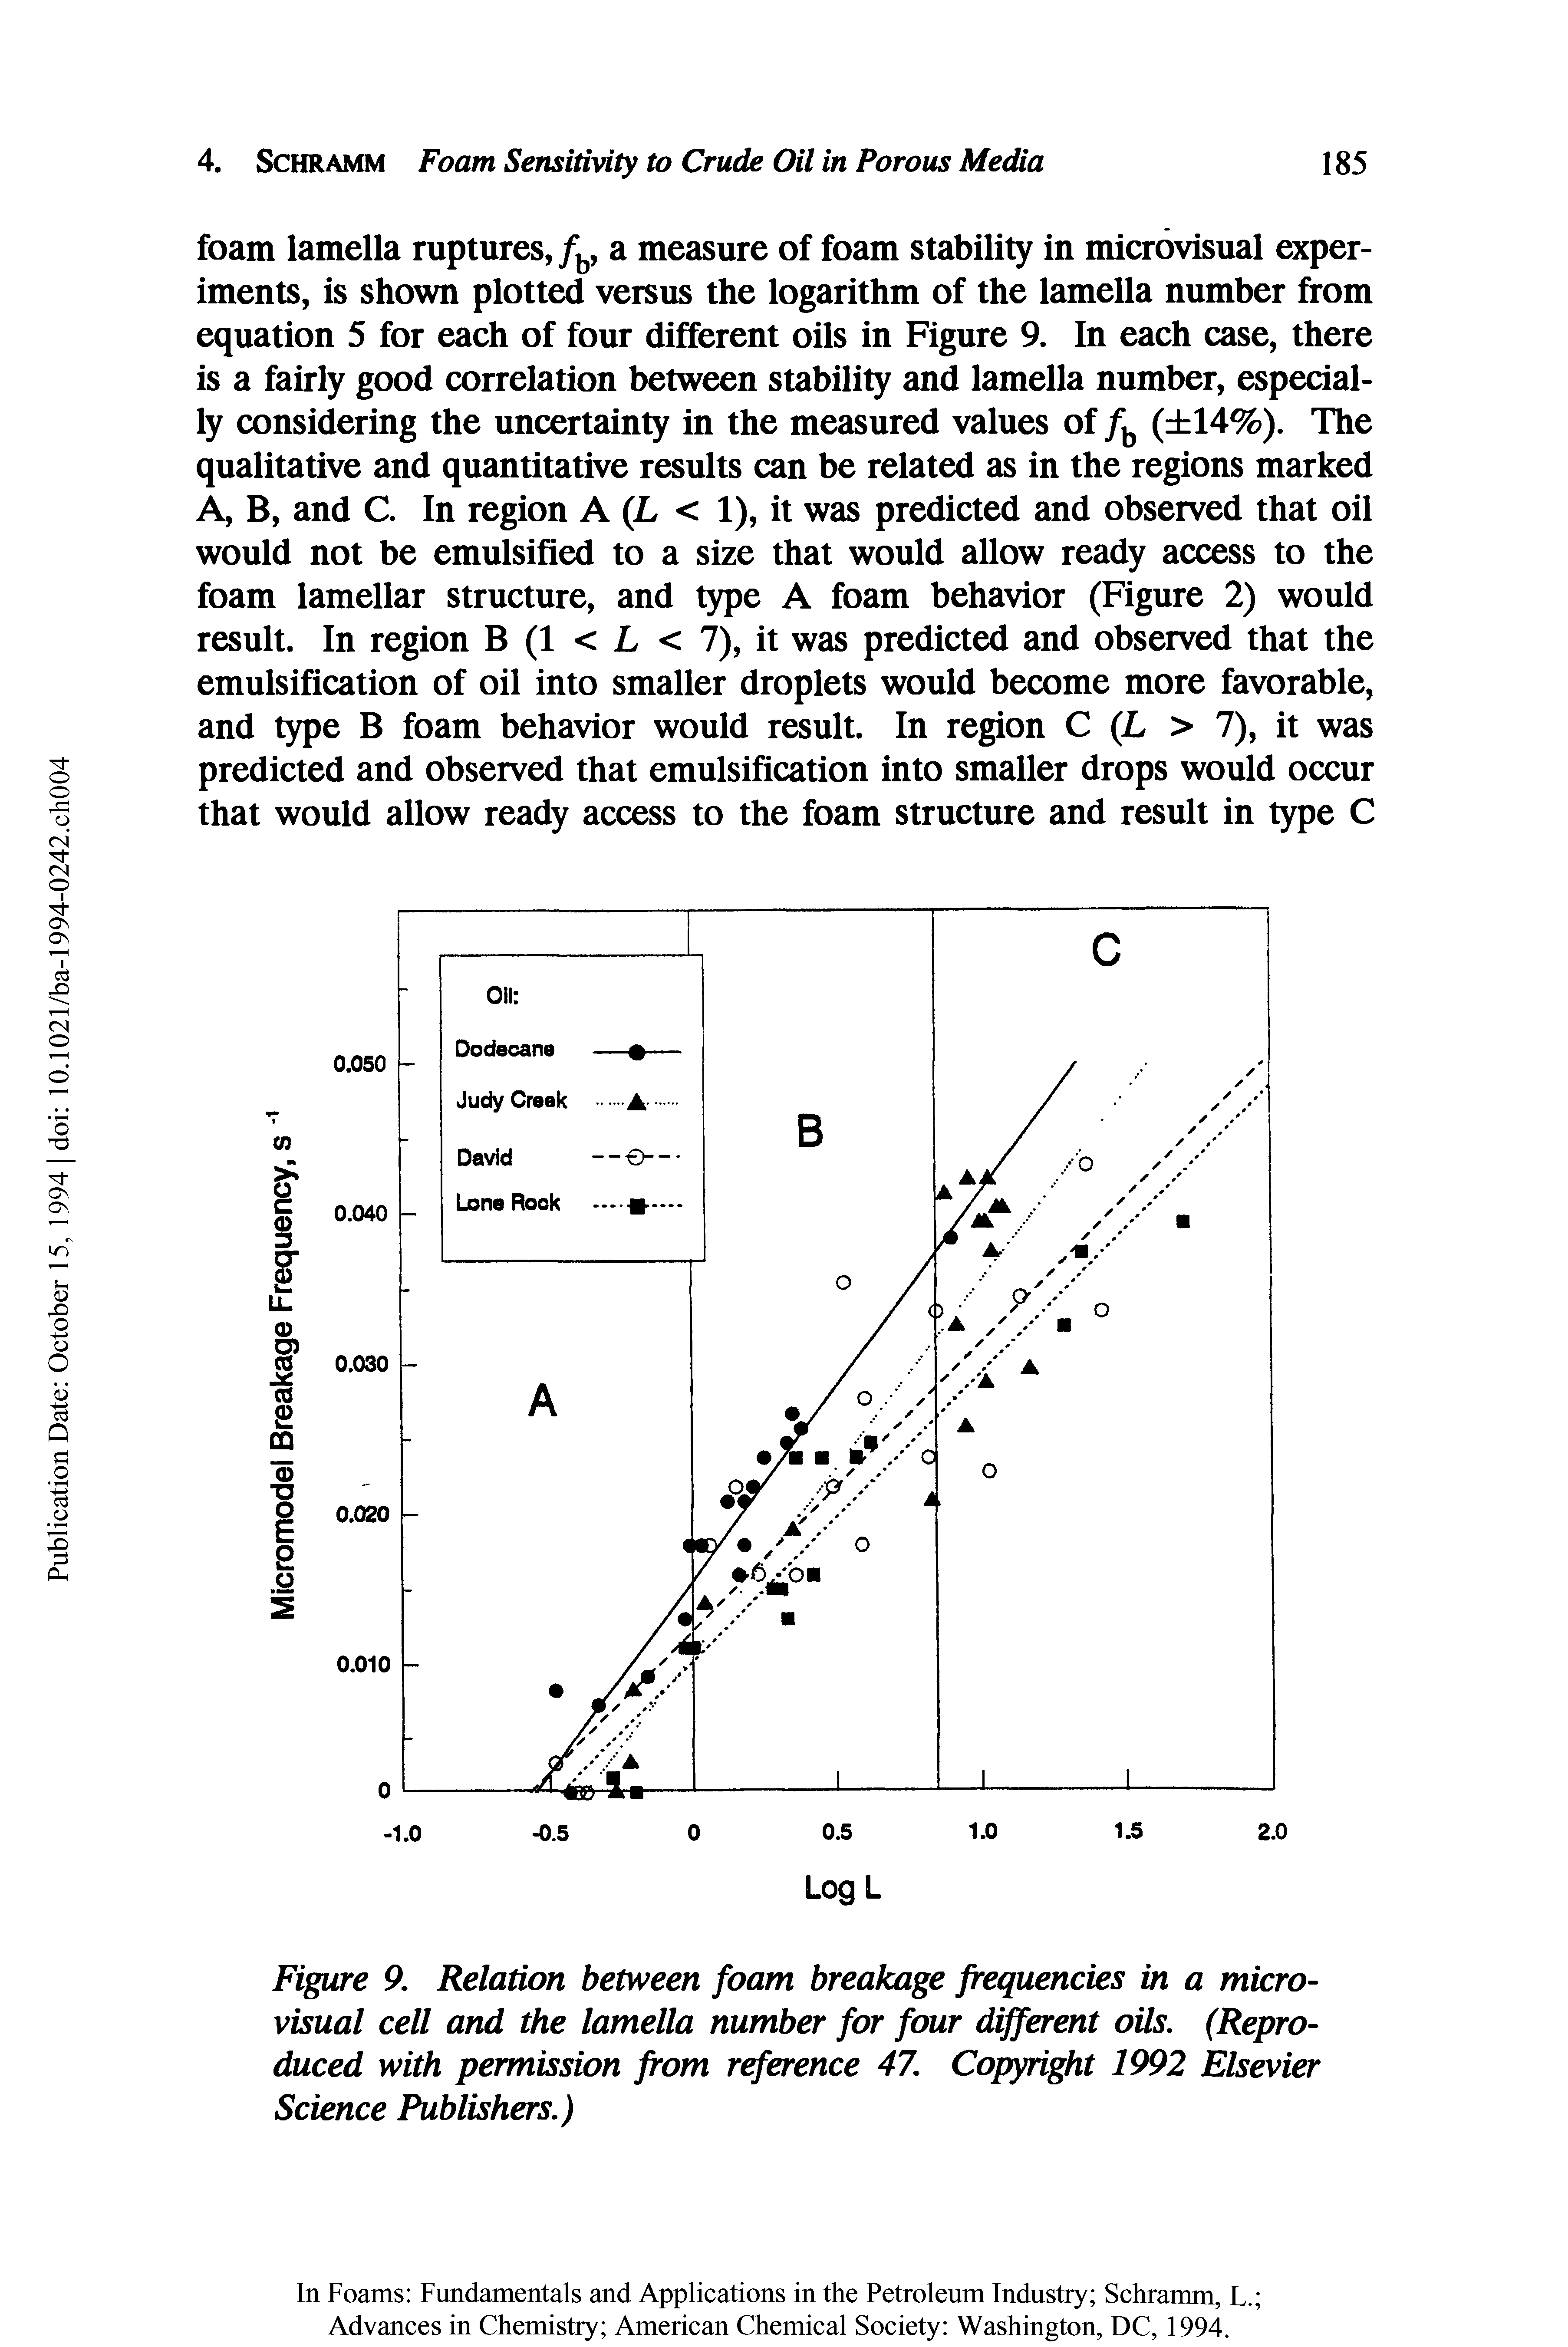 Figure 9. Relation between foam breakage frequencies in a microvisual cell and the lamella number for four different oils. (Reproduced with permission from reference 47. Copyright 1992 Elsevier Science Publishers.)...